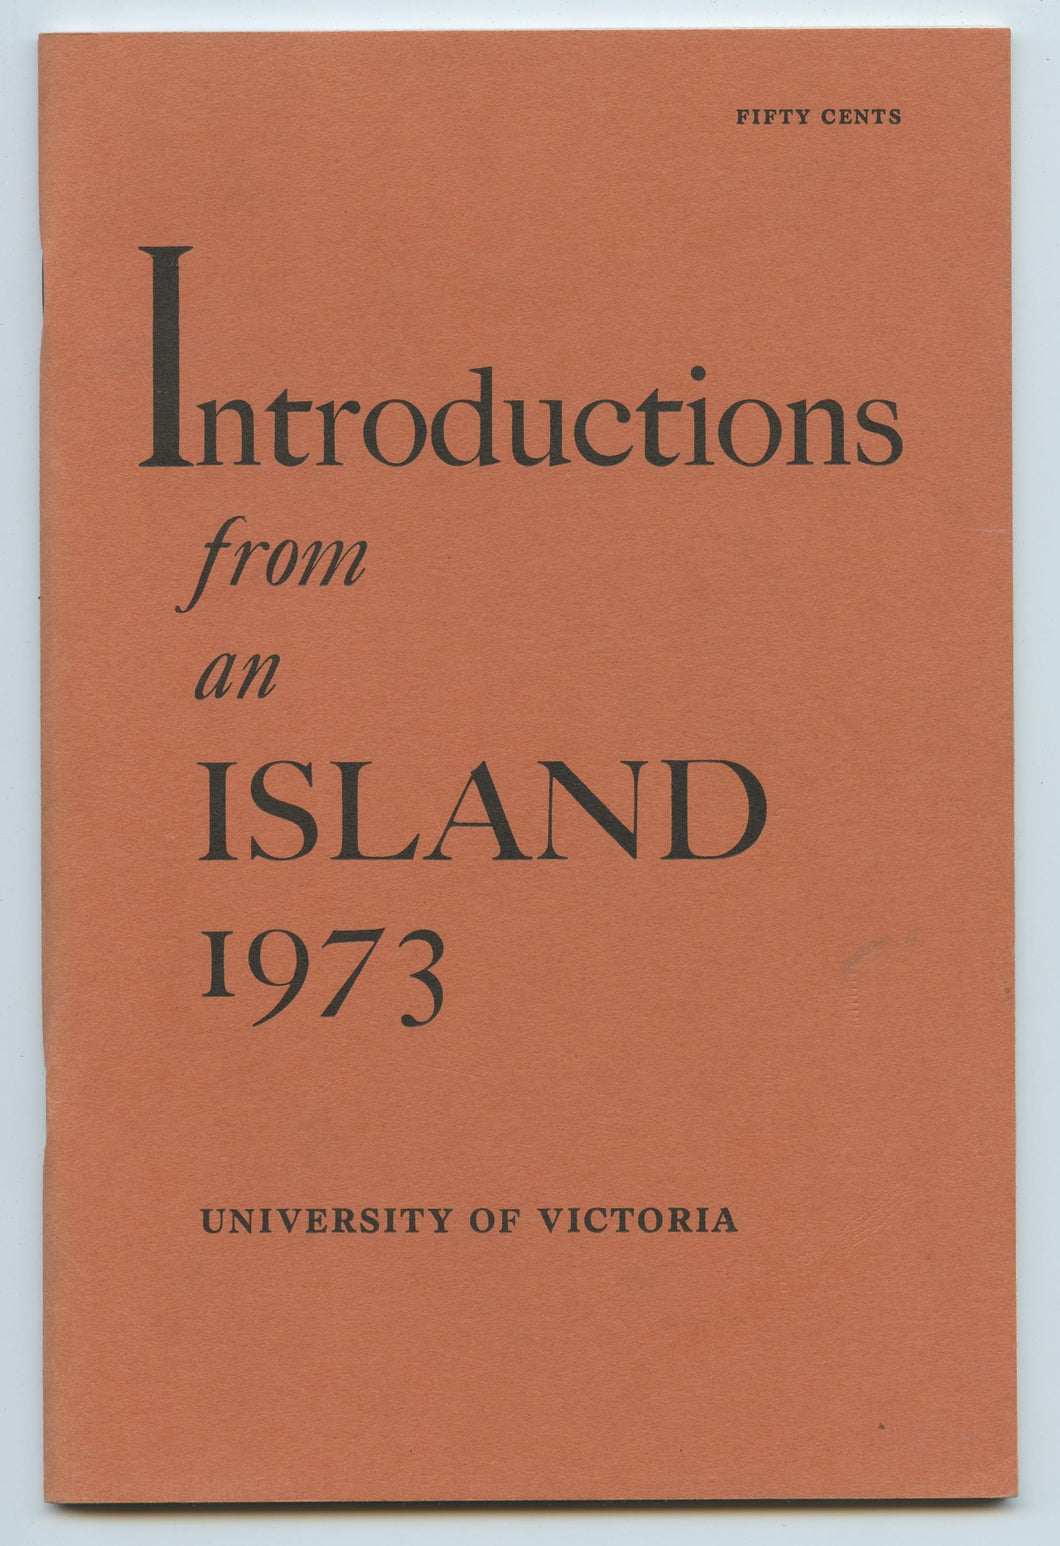 Introductions from an Island 1973